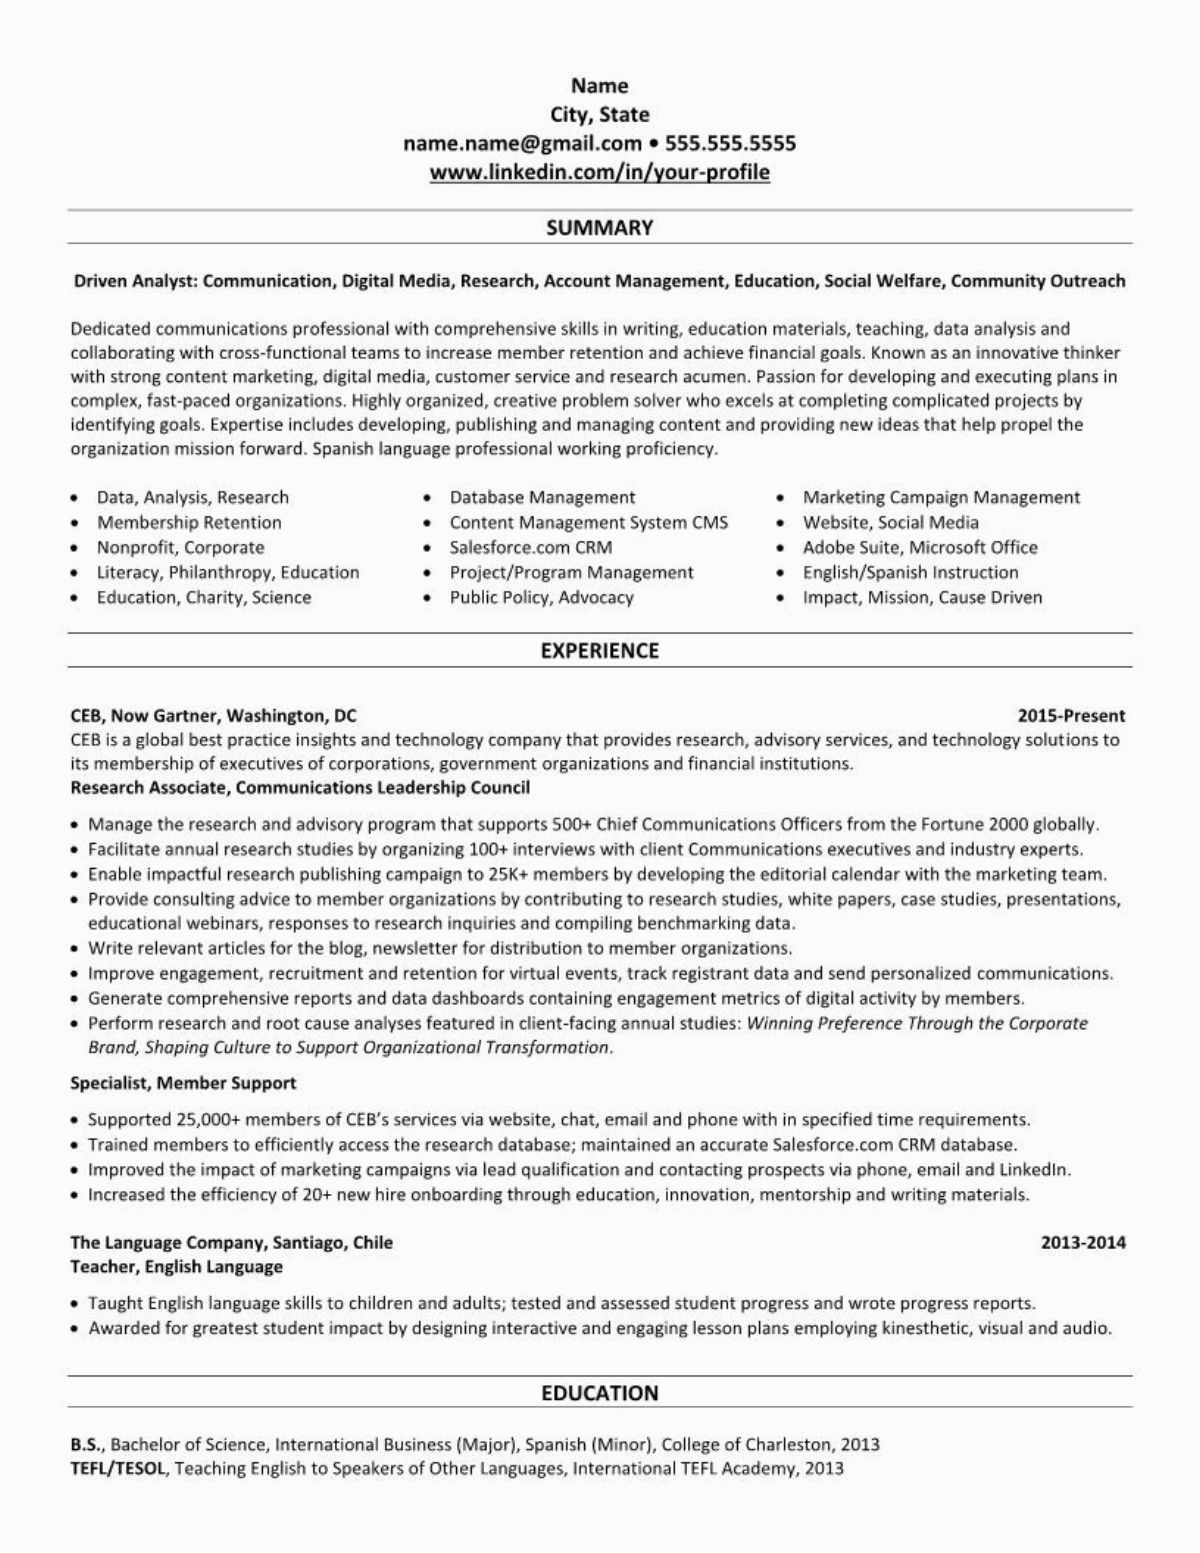 Sample Of Career Profile On Resume Linkedin Profile Resume Example Entry Level Early Career